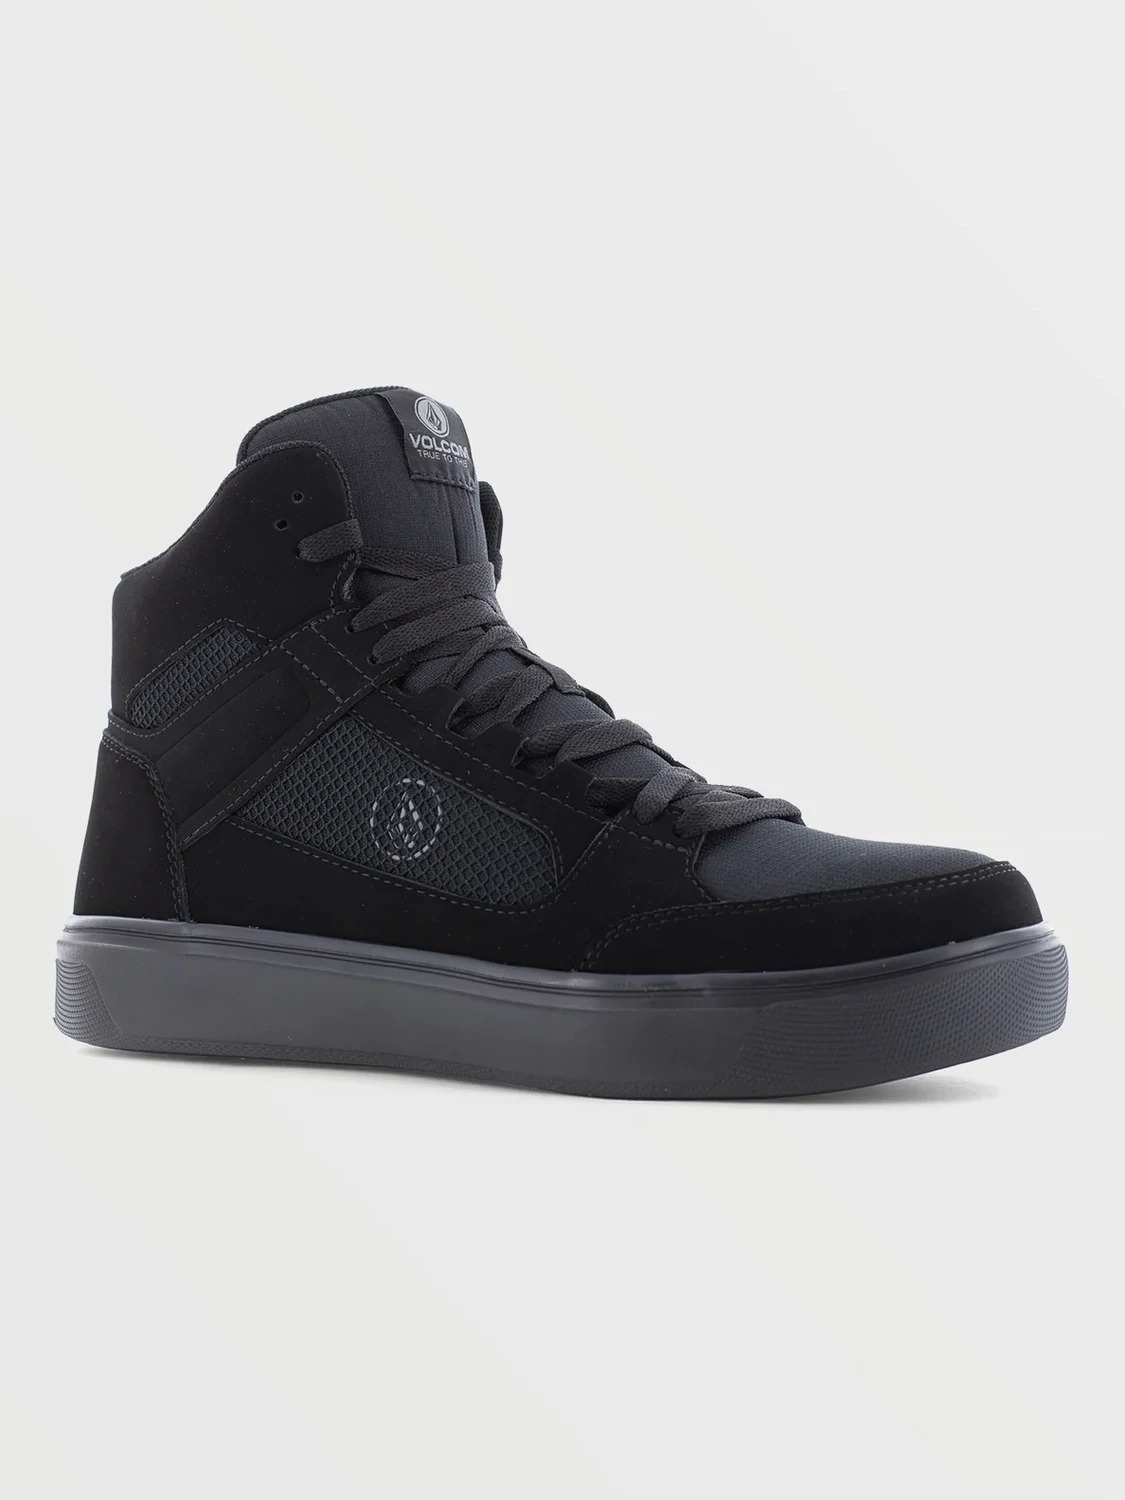 Men's Evolve High Top Composite Toe Athletic by Volcom